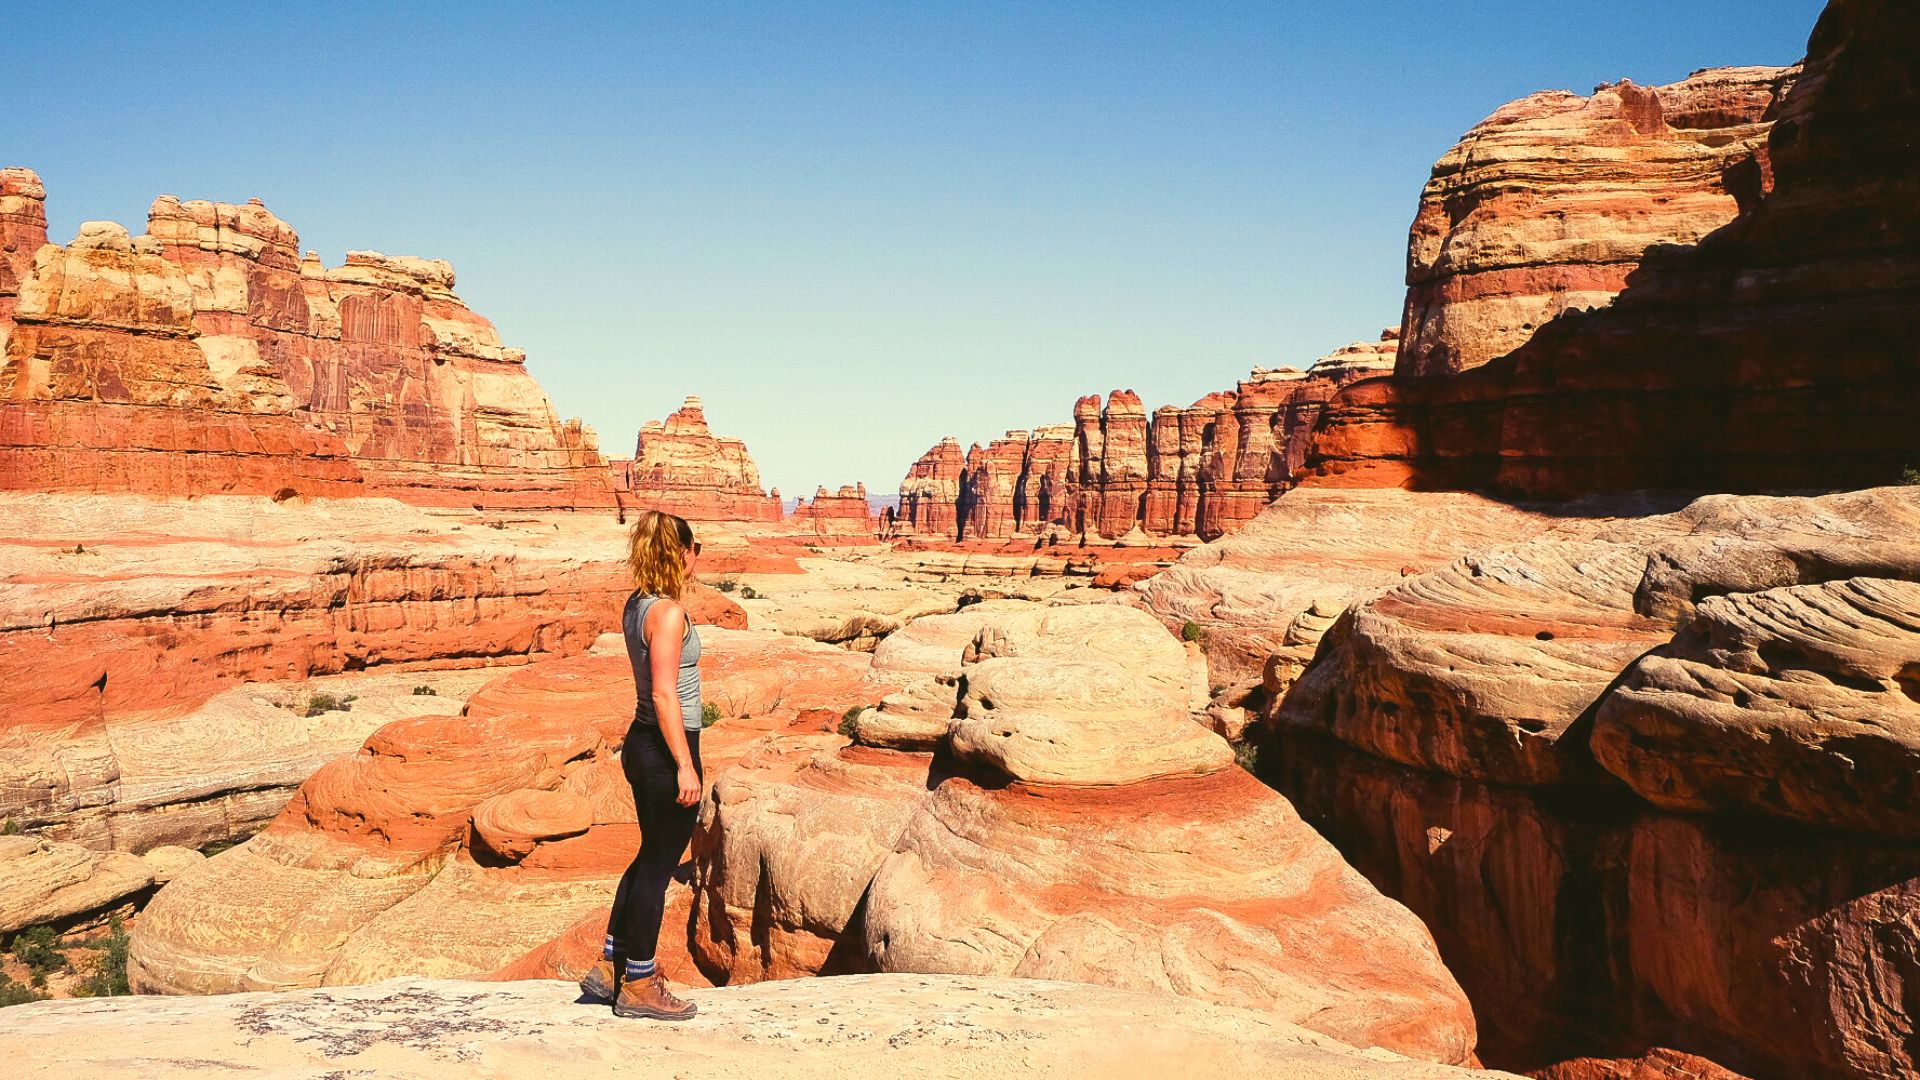 Woman stands alone looking out over canyonlands national needles district